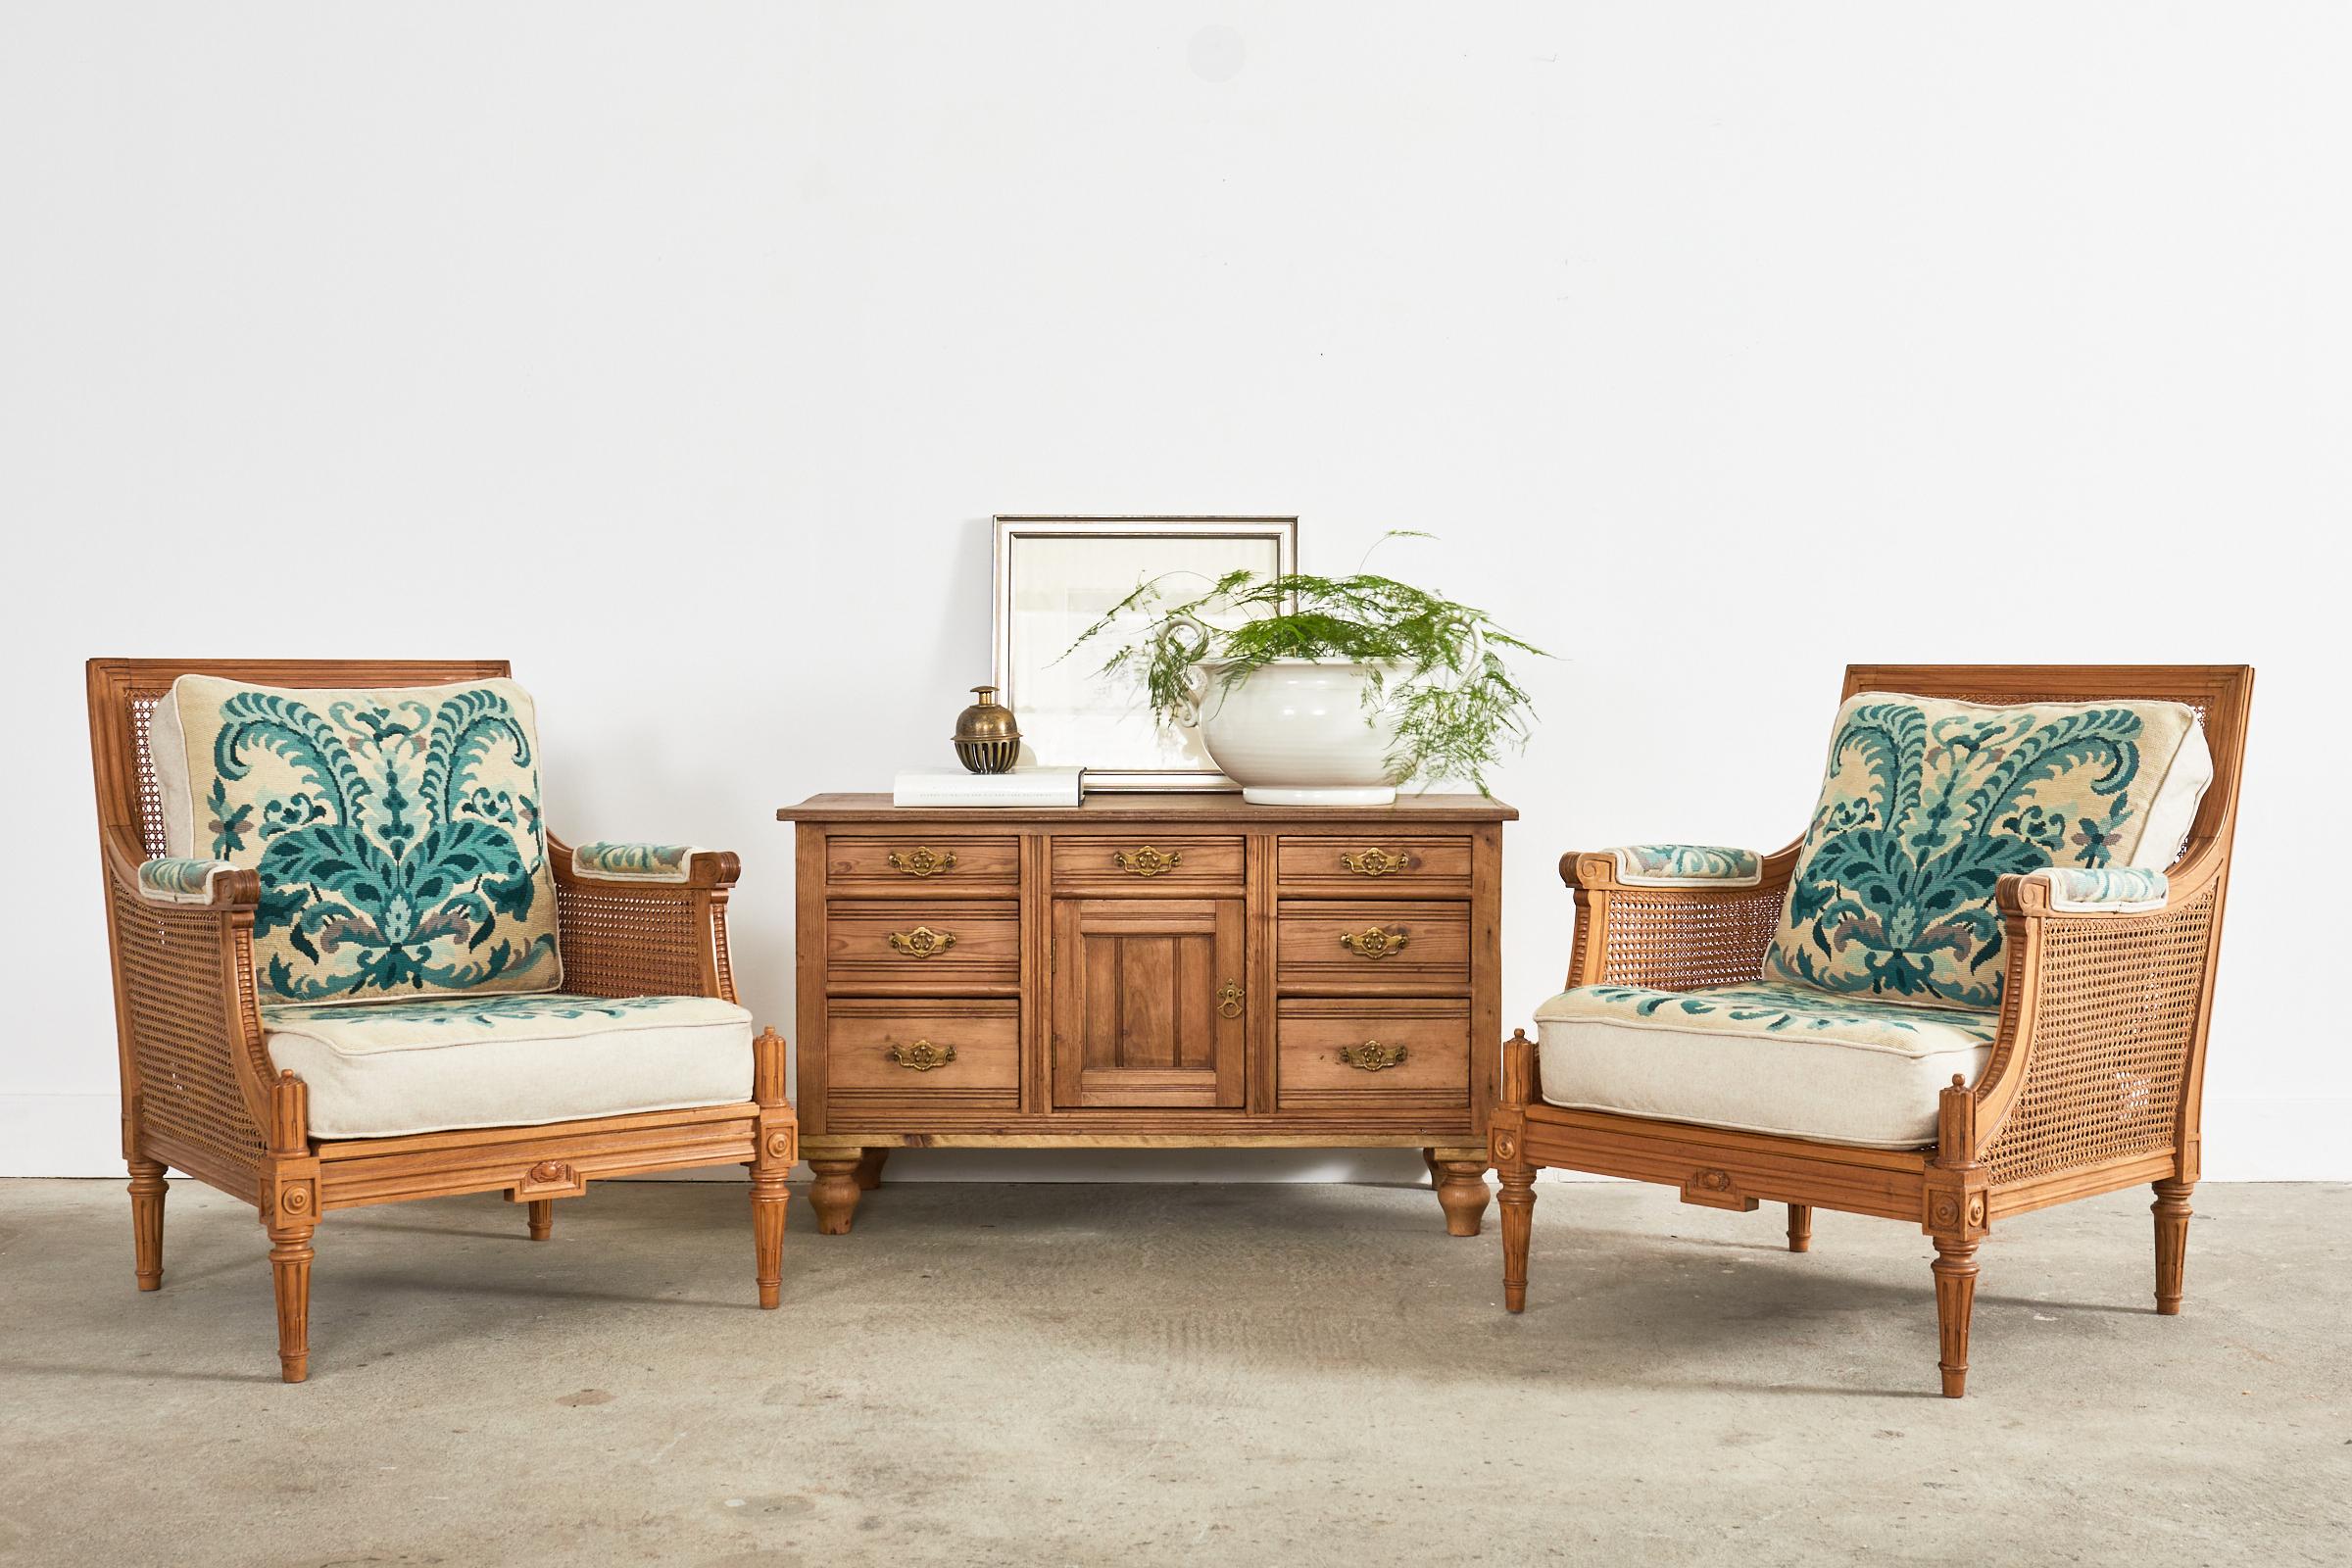 Divine pair of French caned lounge chairs or armchairs featuring the original art nouveau style needlepoint. Beautifully crafted from walnut in the grand Louis XVI taste with a flat square back and seat. The seat and backs are caned and the sides